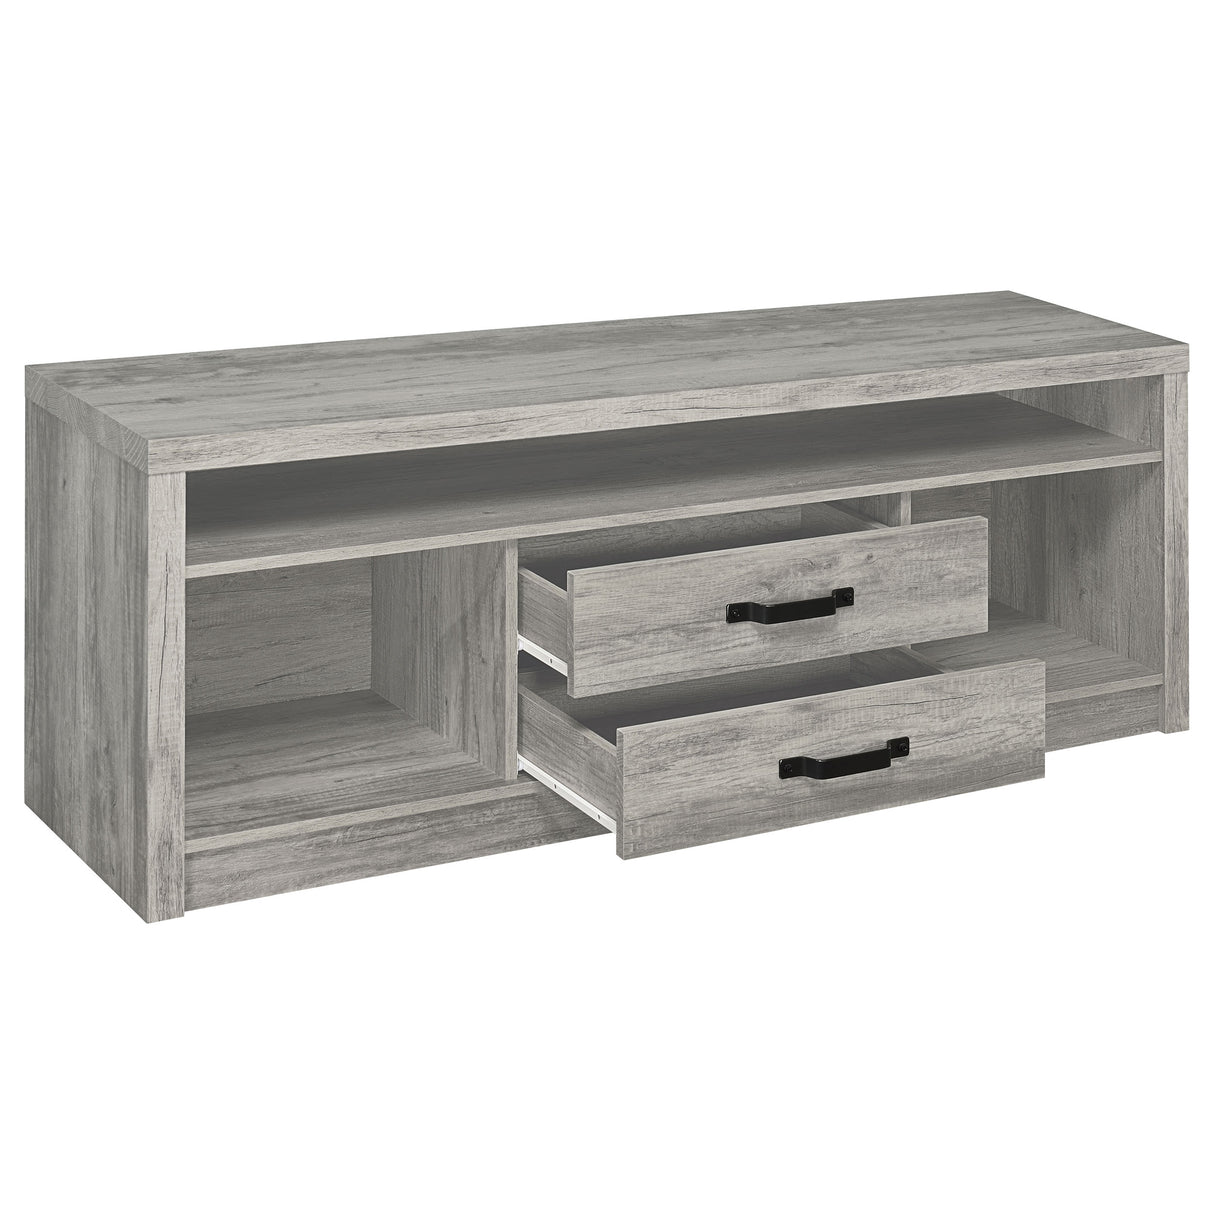 59" Tv Stand - Burke 2-drawer TV Console Grey Driftwood